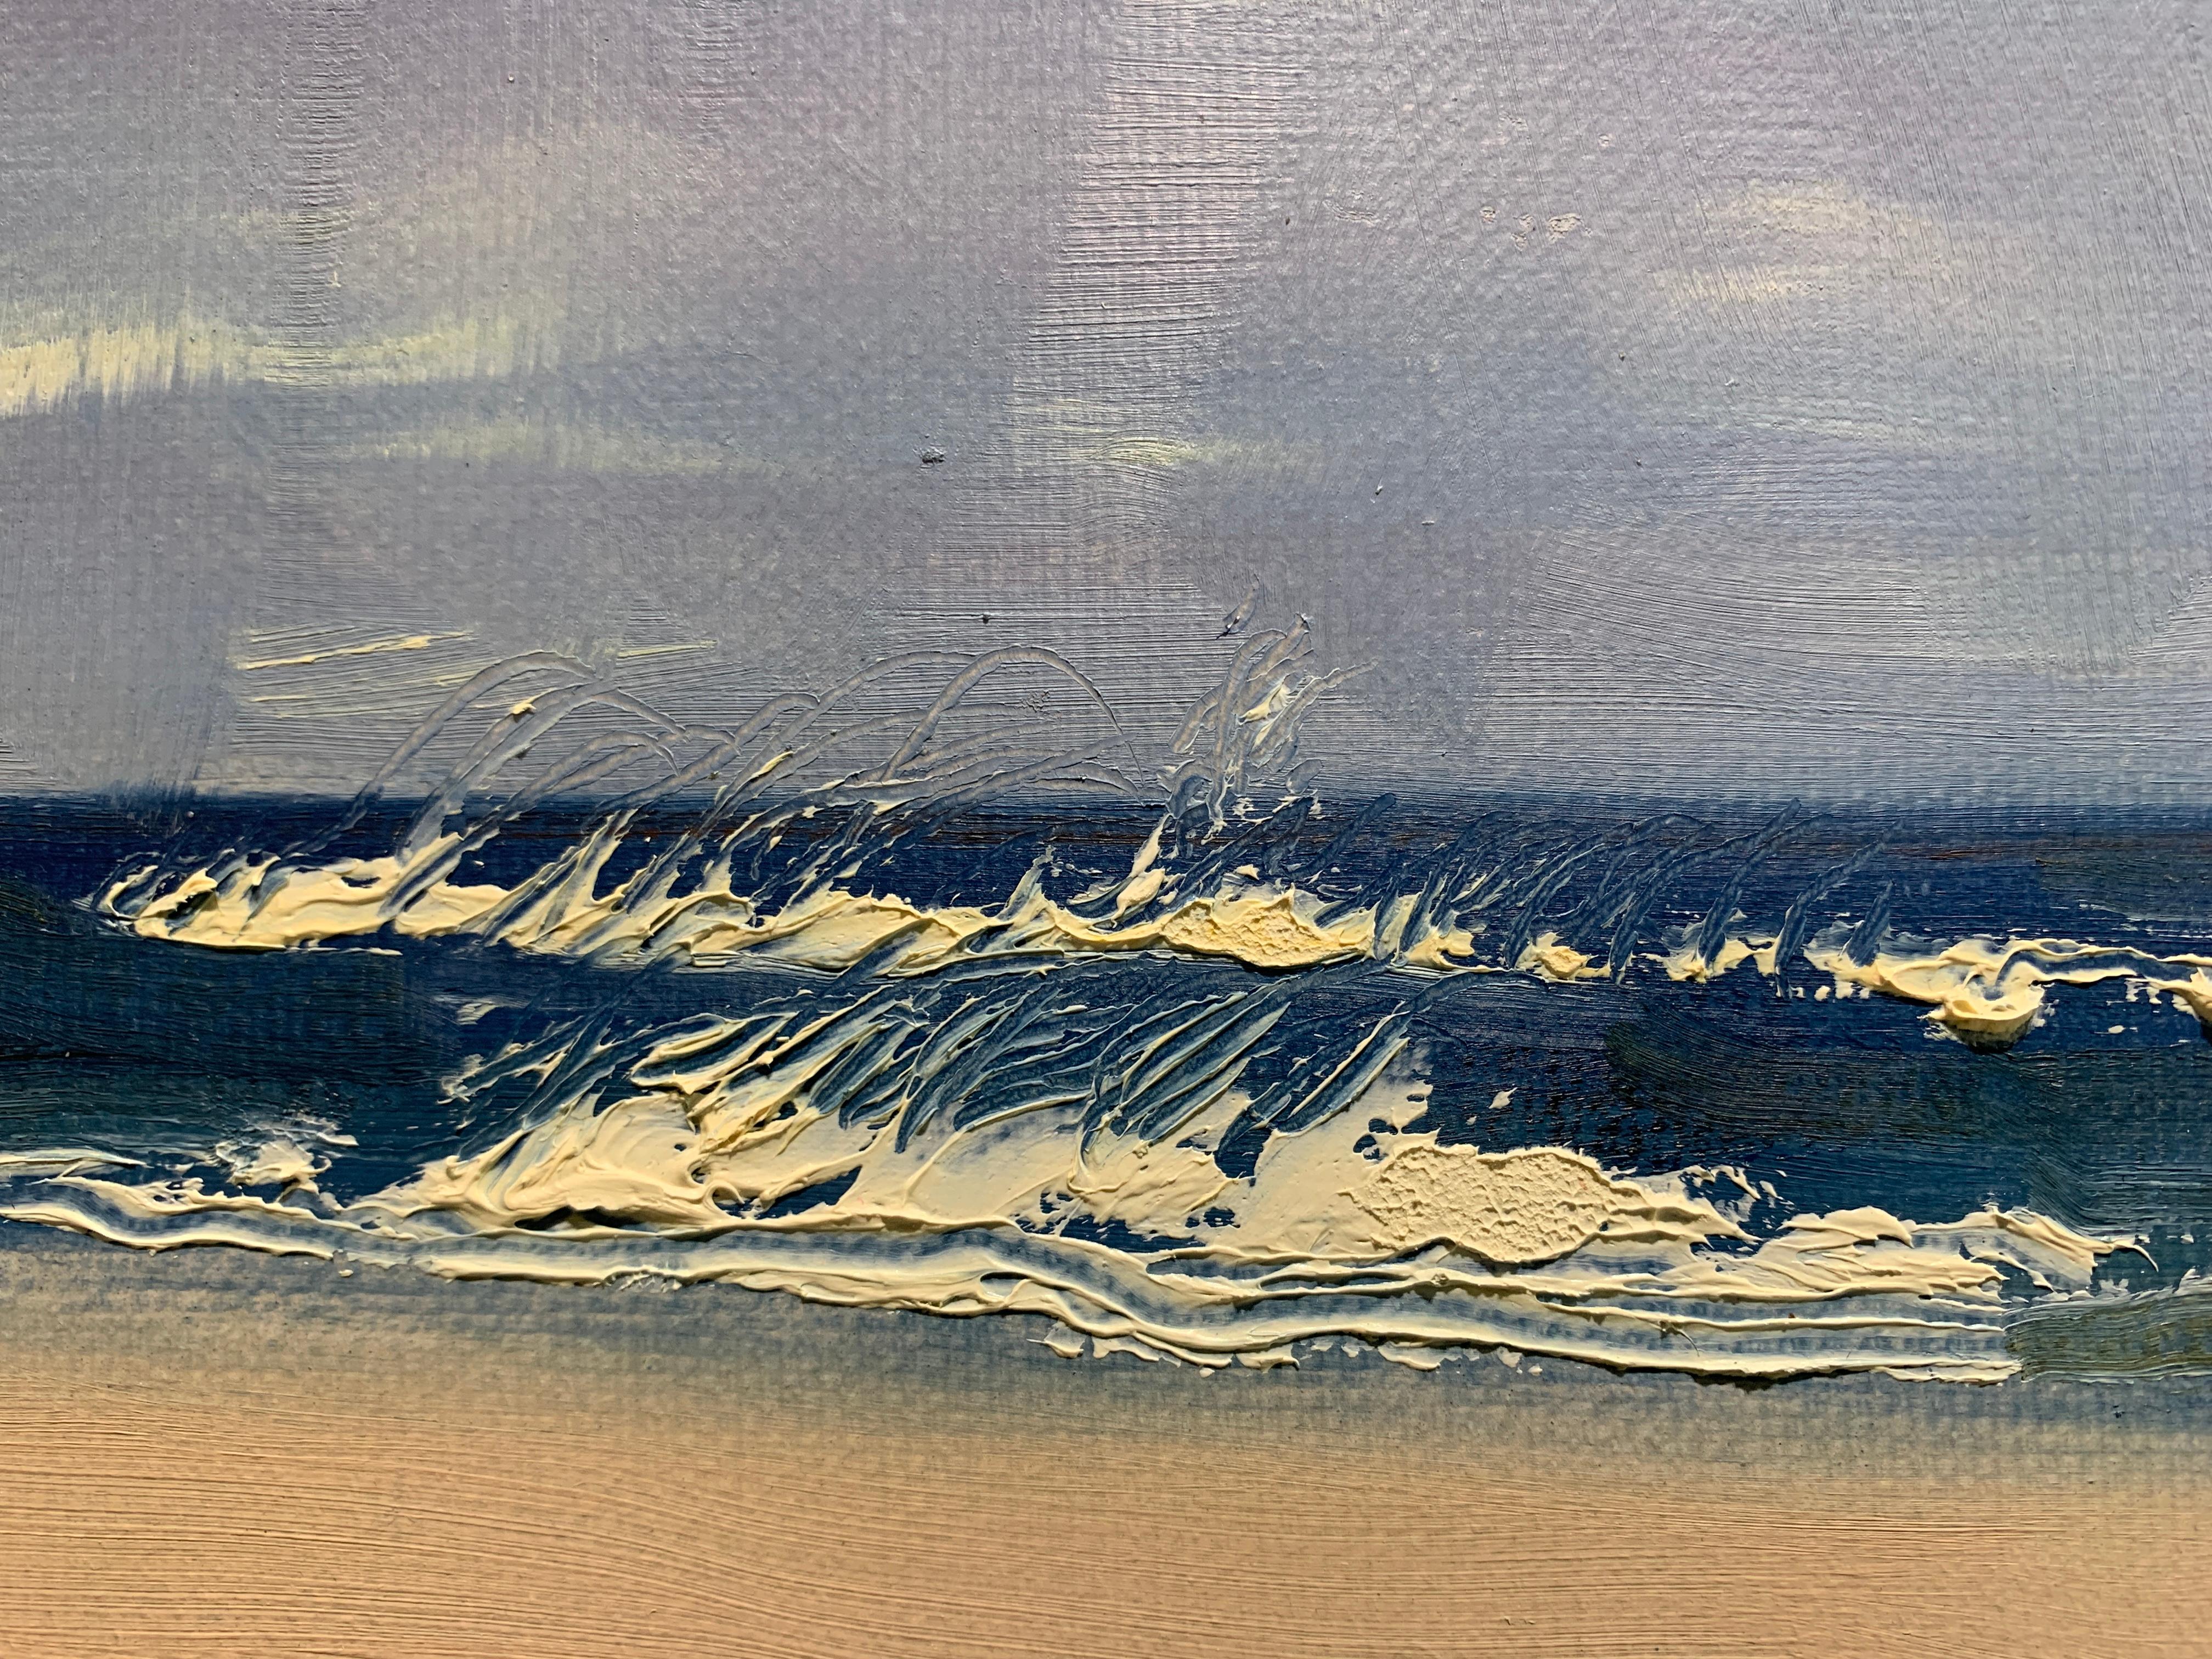 The Waves Coopers Beach 09.21.2020 - Blue Landscape Painting by Nelson H. White